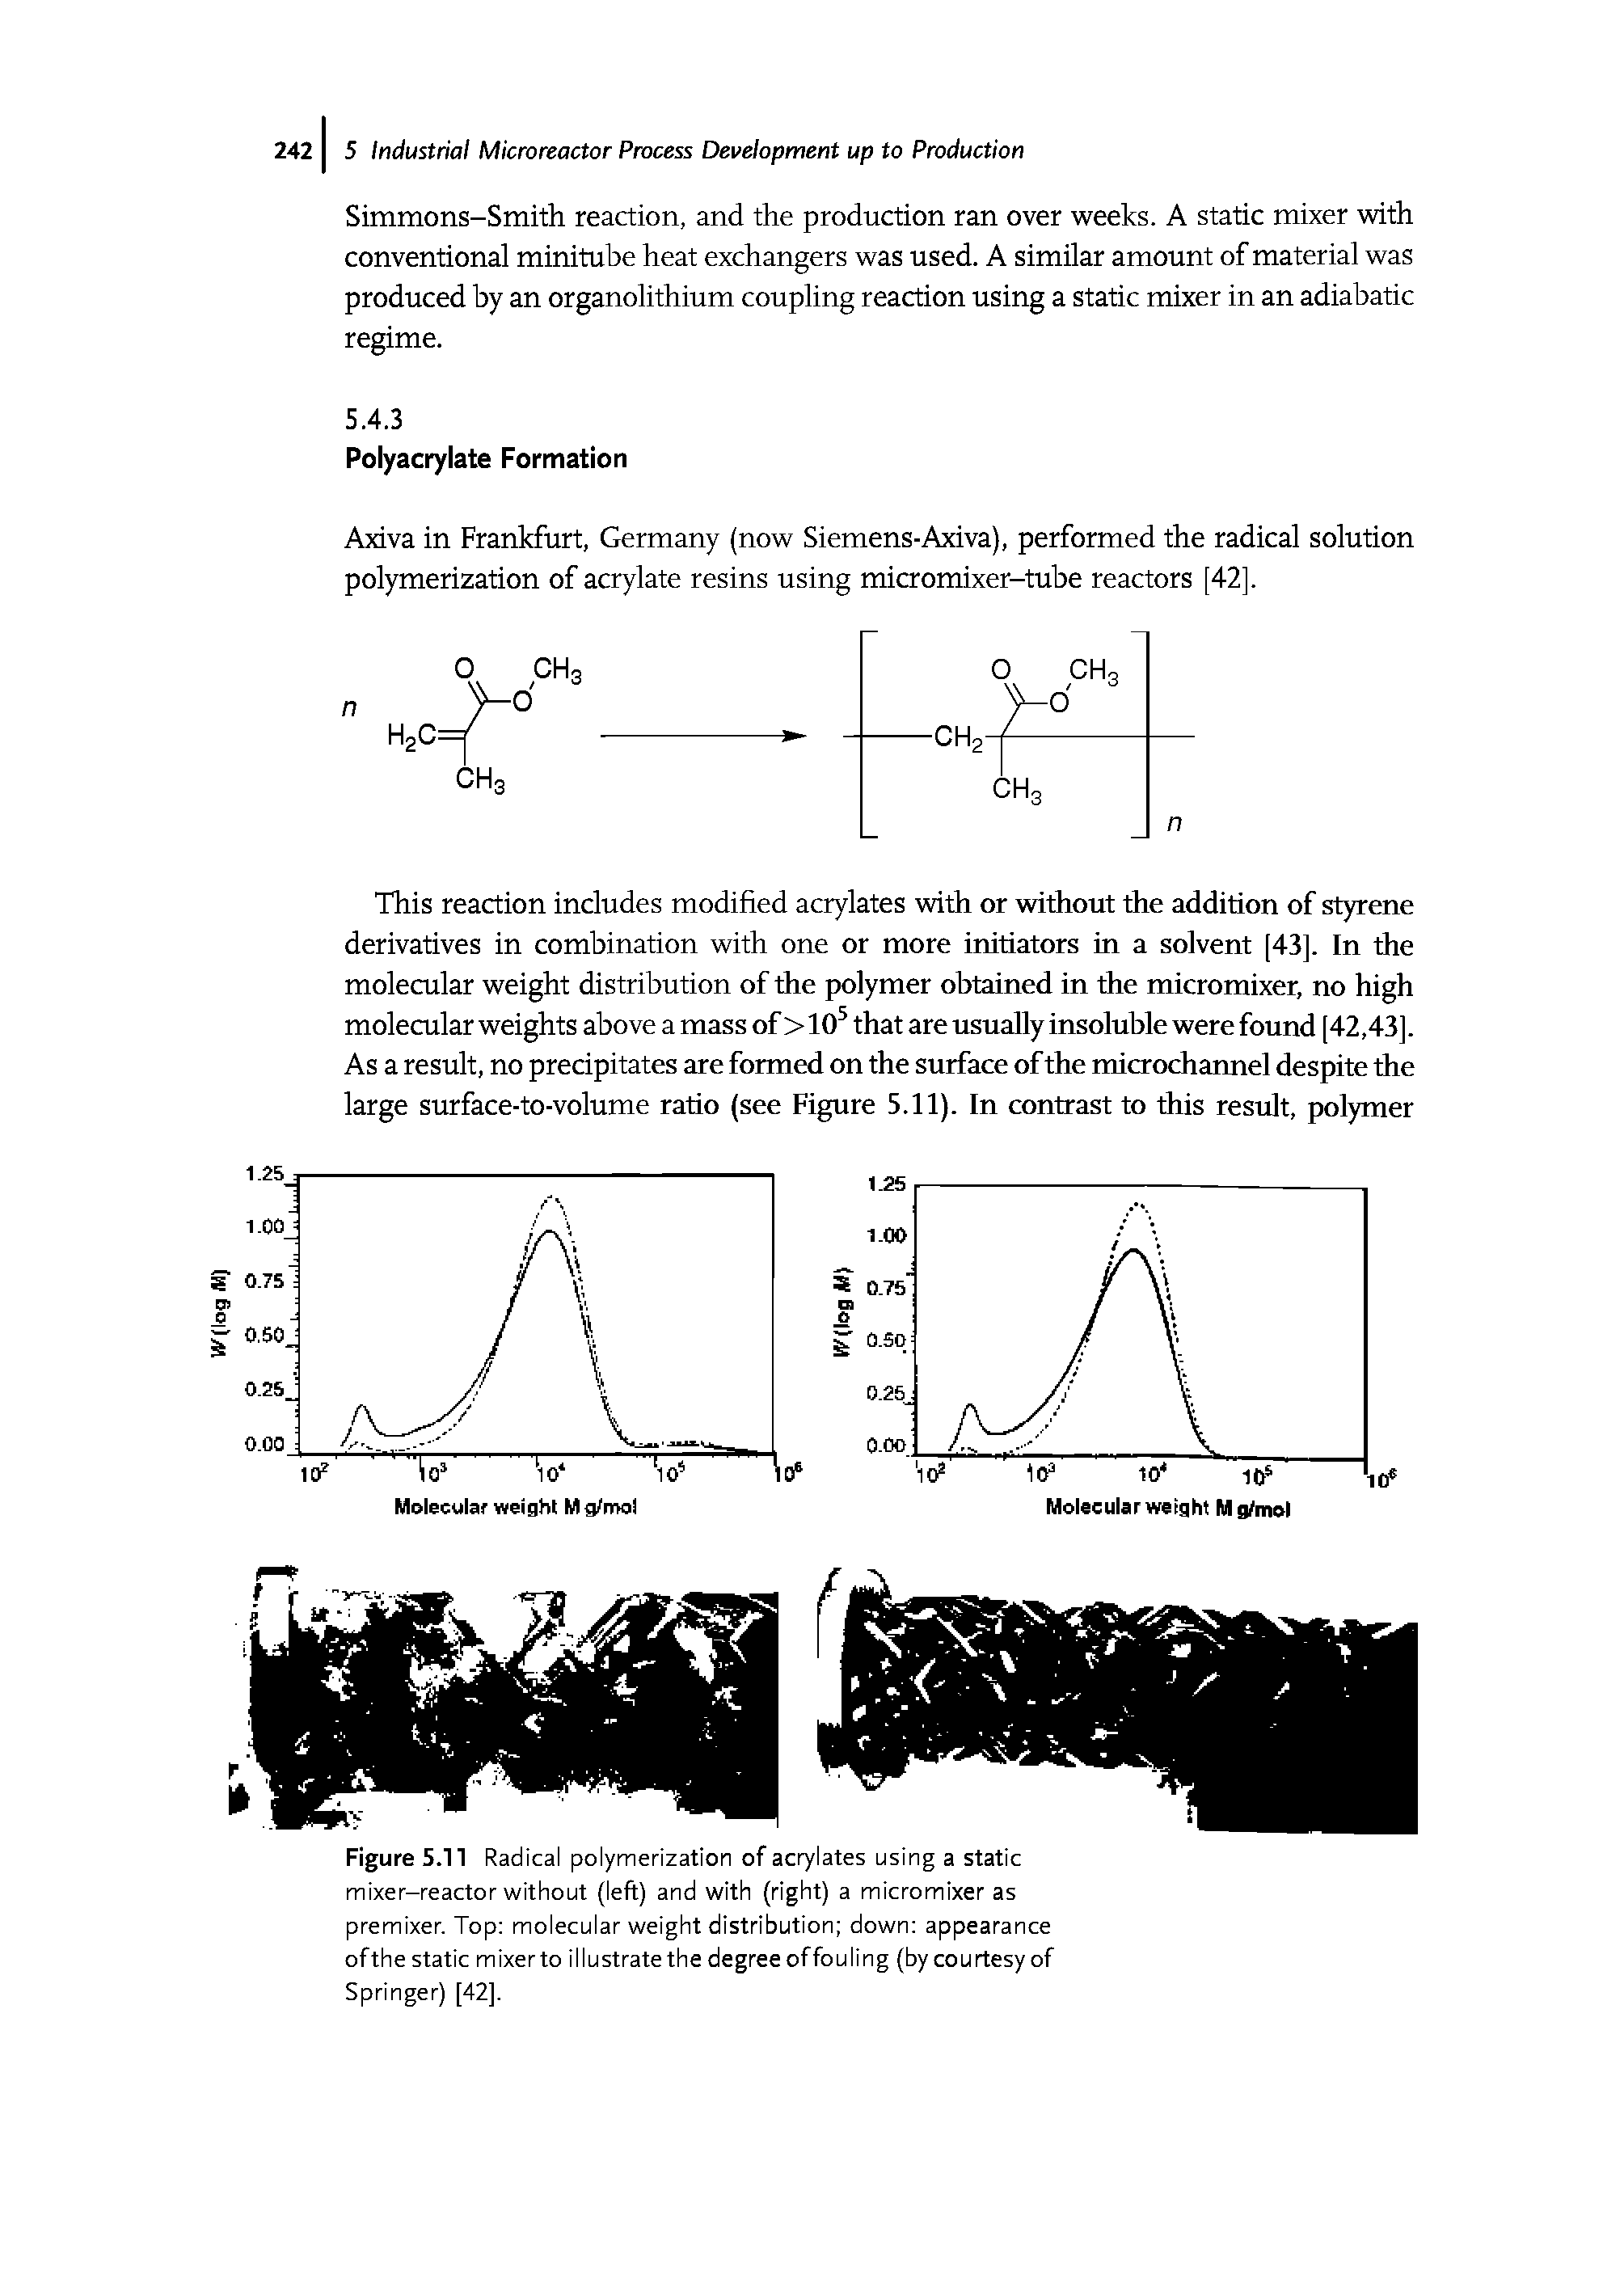 Figure 5.11 Radical polymerization of acrylates using a static mixer-reactor without (left) and with (right) a micromixer as premixer. Top molecular weight distribution down appearance ofthe static mixer to illustrate the degree offou ling (by courtesy of Springer) [42],...